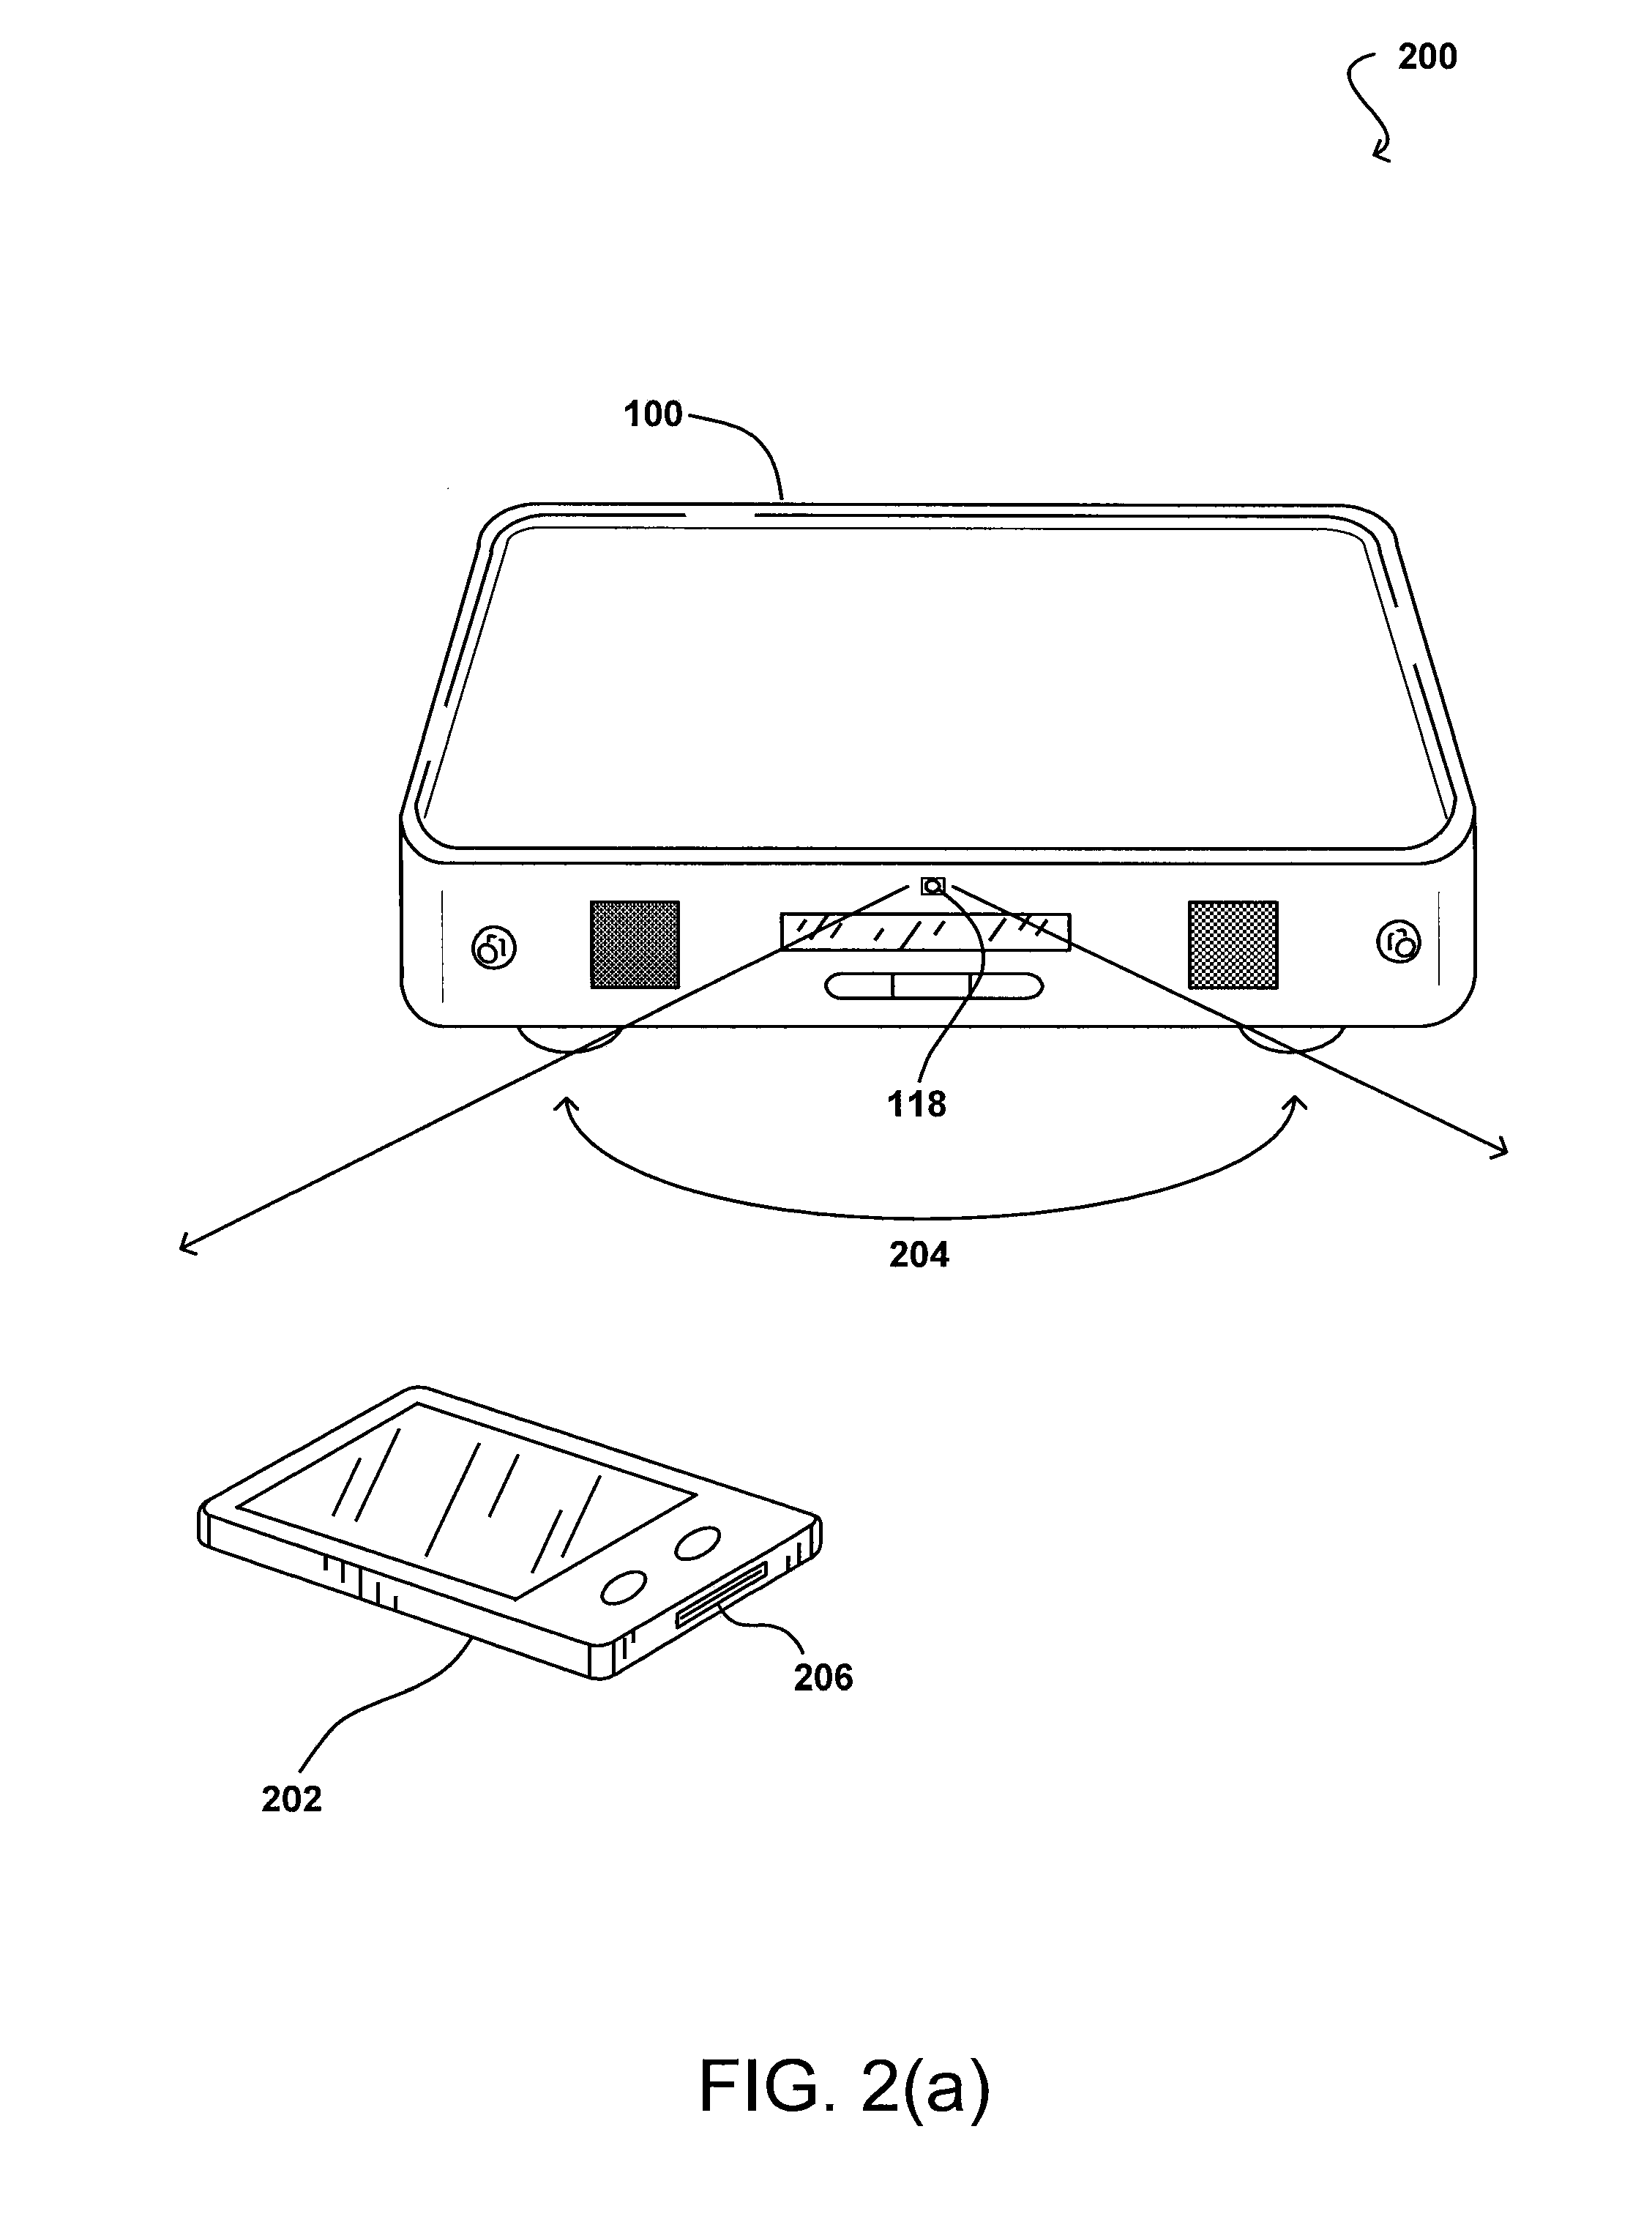 Charging an electronic device including traversing at least a portion of a path with an apparatus